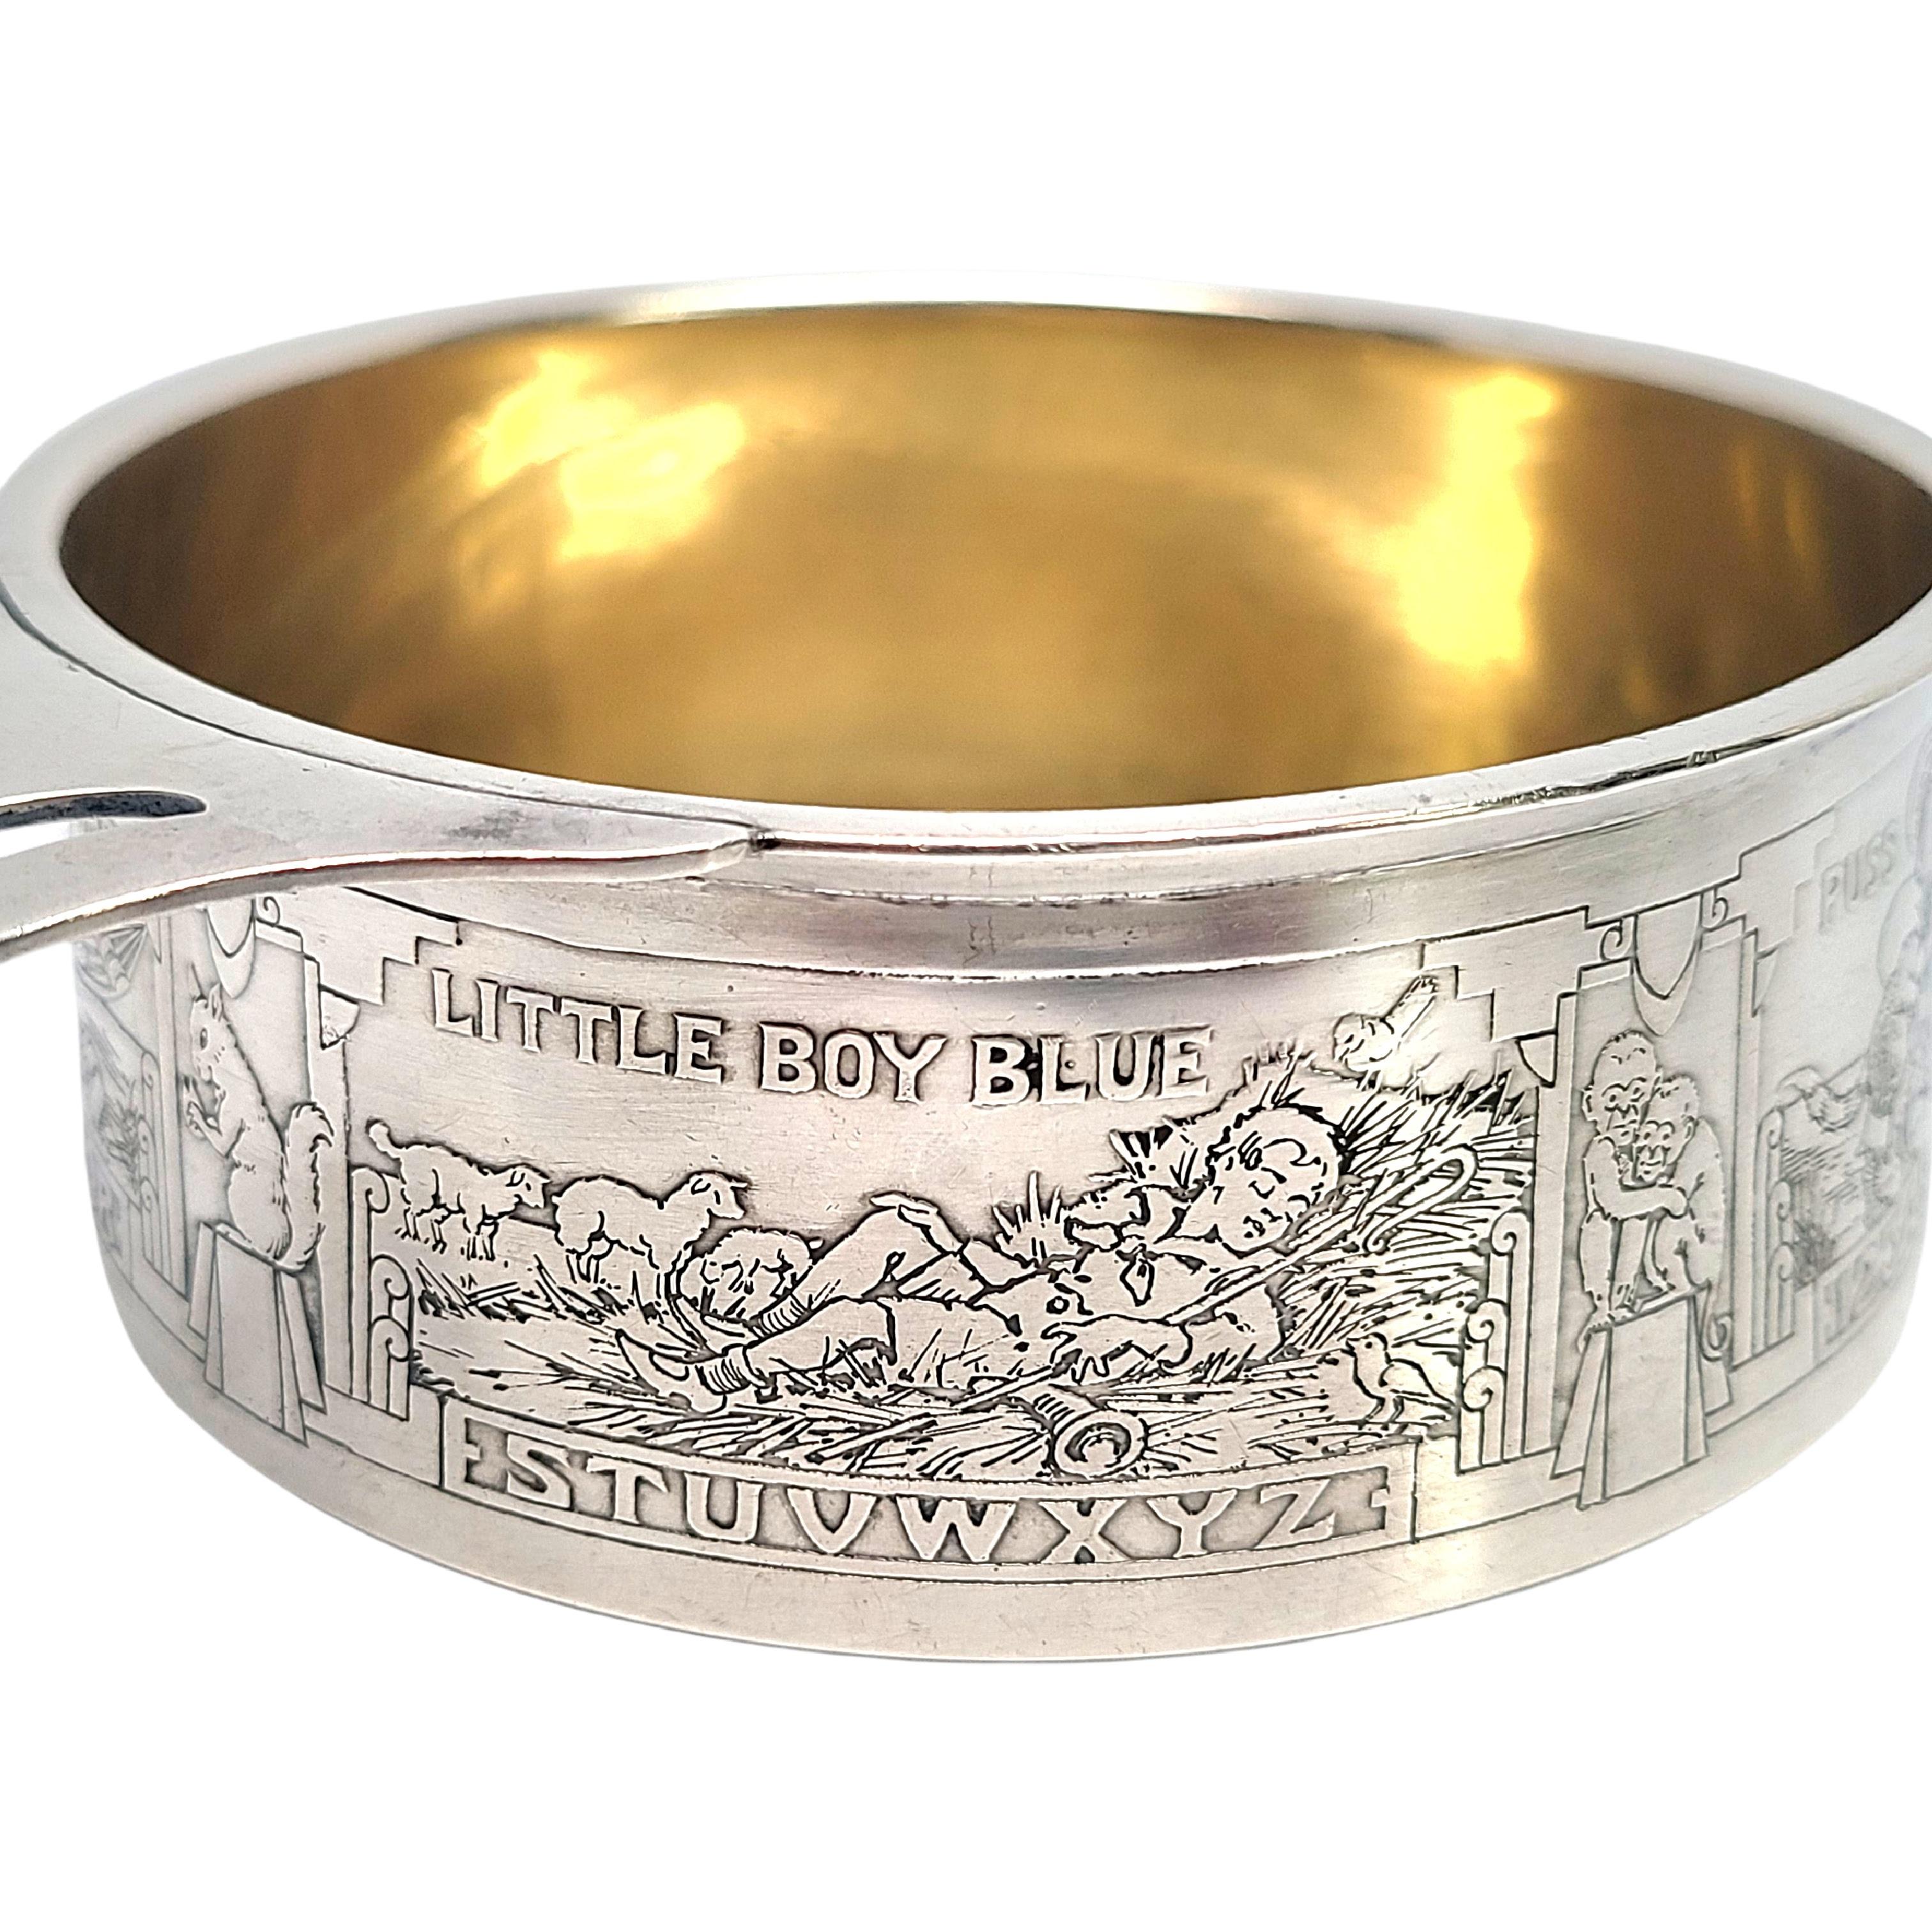 Vintage nursery rhyme theme sterling silver porringer by Gorham

Engraving at center appears to be H FROM HH

A beautiful etched design with classic, timeless appeal, this child's bowl/porringer features the alphabet, numbers 1 thru 10, little